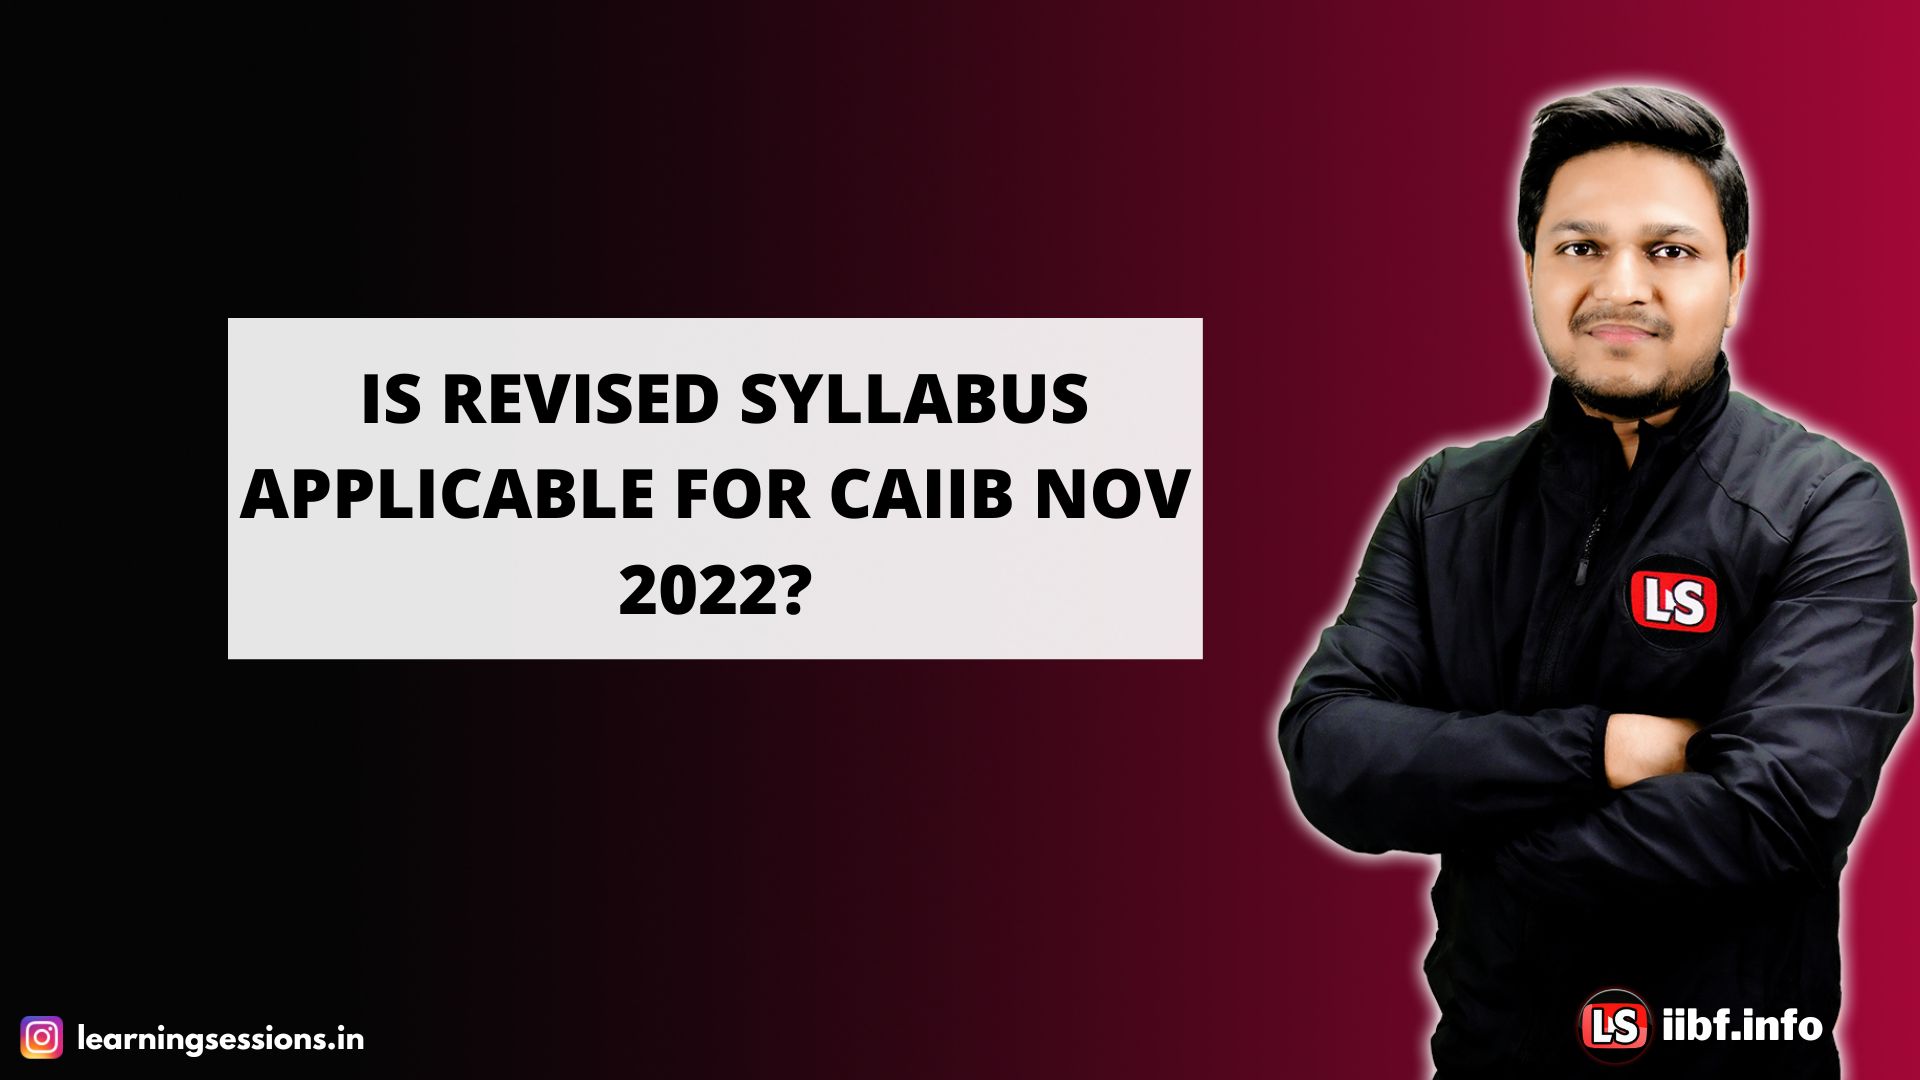 IS REVISED SYLLABUS APPLICABLE FOR CAIIB NOV 2022? 